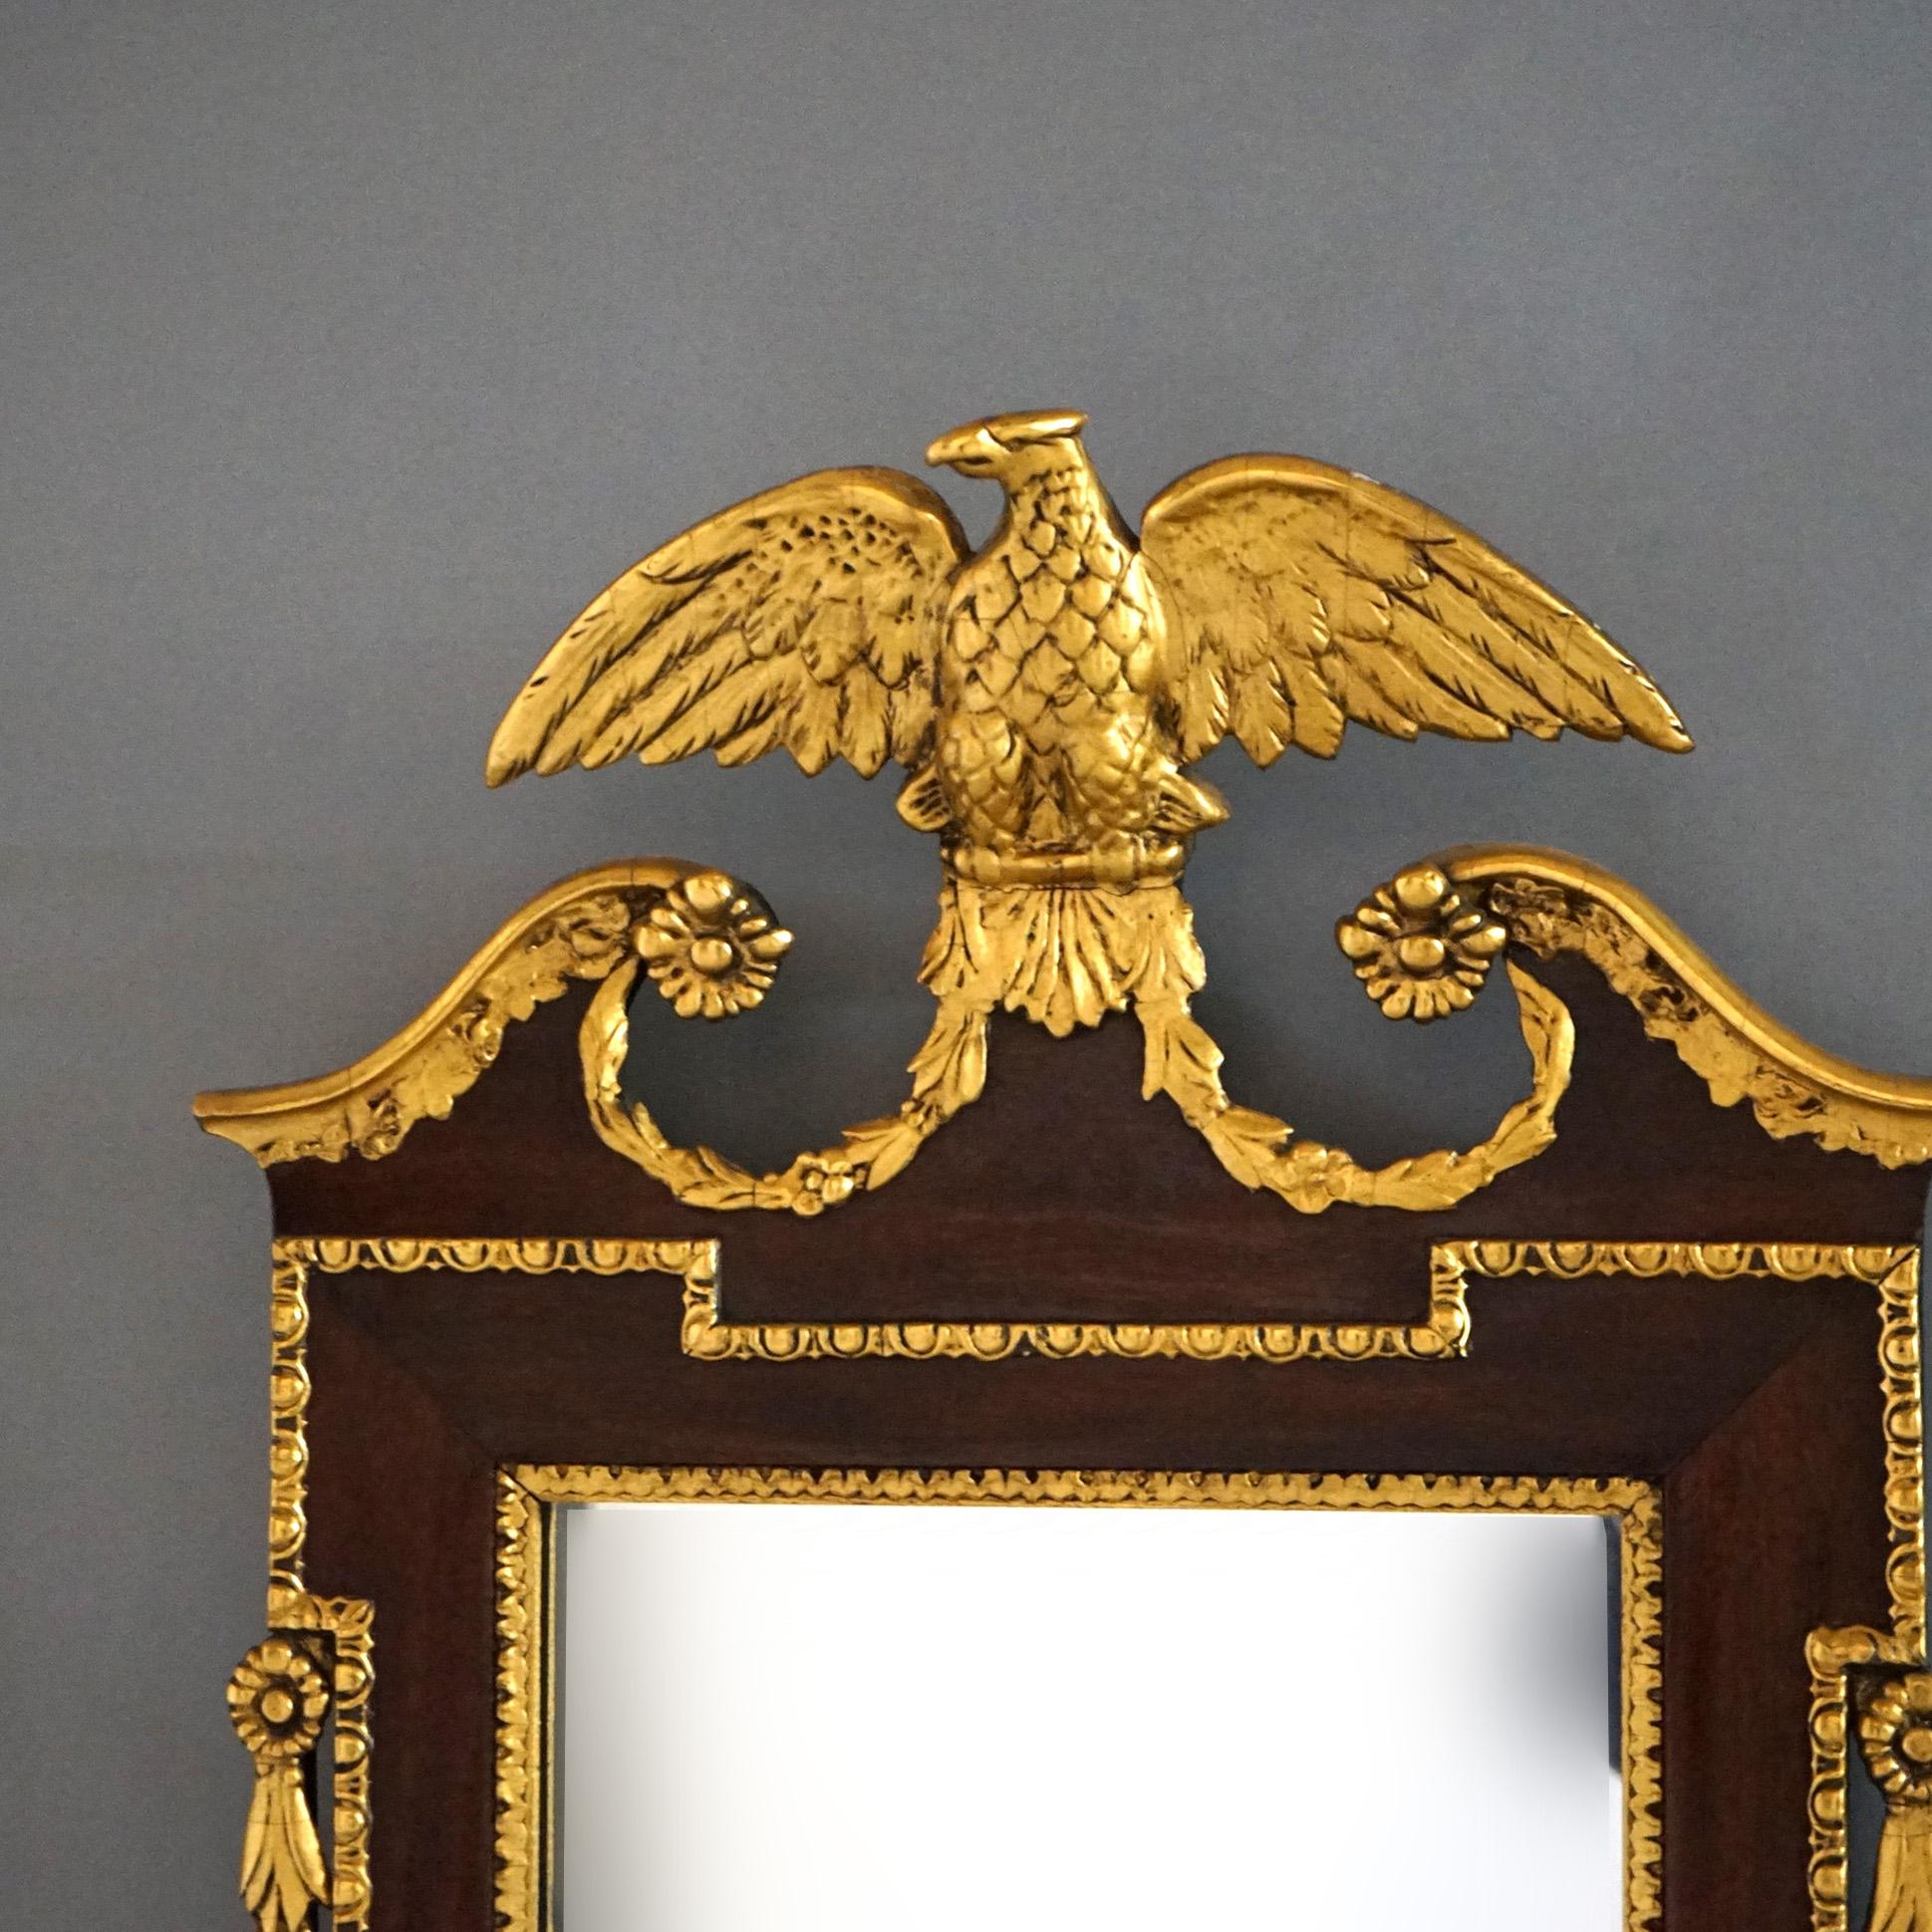 ***Ask About Reduced In-House Shipping Rates - Reliable Service & Fully Insured***
An antique Federal wall mirror offers shaped mahogany frame having giltwood figural eagle crest, flanking inverted bellflowers, and trim; en verso scripted Aug 27,